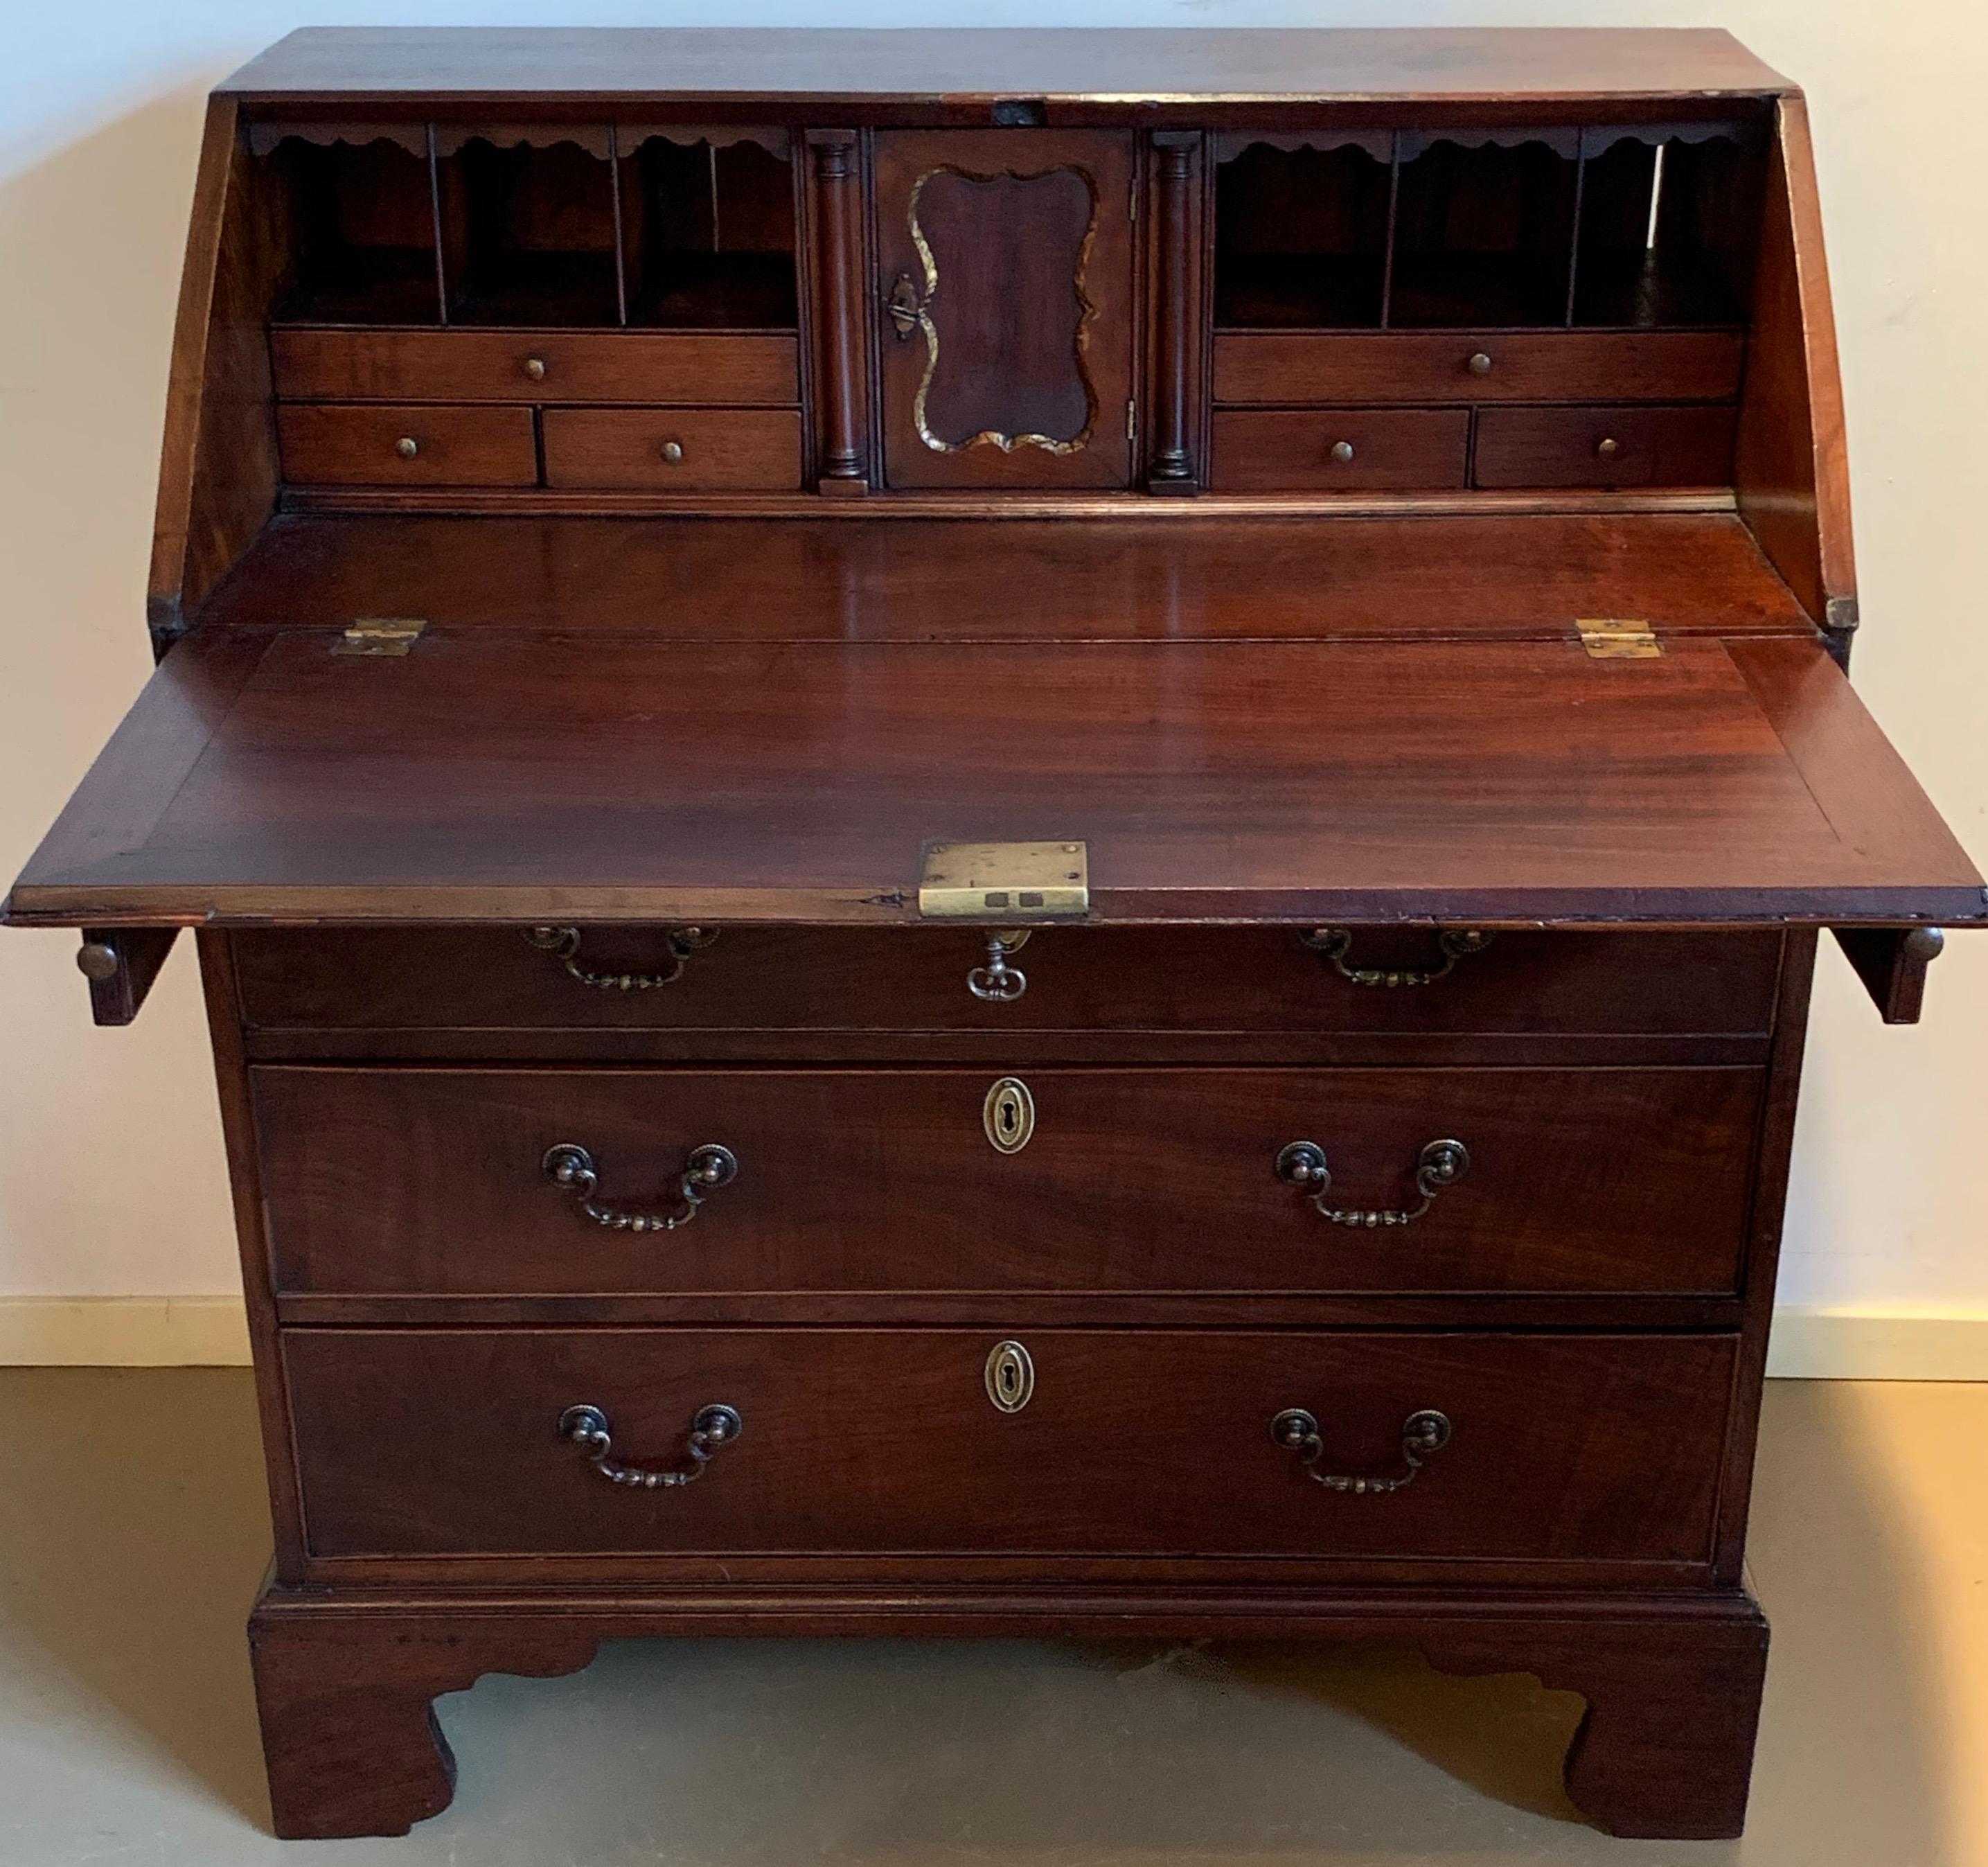 English massive mahogany secretary desk in good condition. This 1860s English secretary desk is made of mahogany with a beautiful patina. Two arms extend from the front of the desk to support the fold down work area. Inside the desk cabinet there